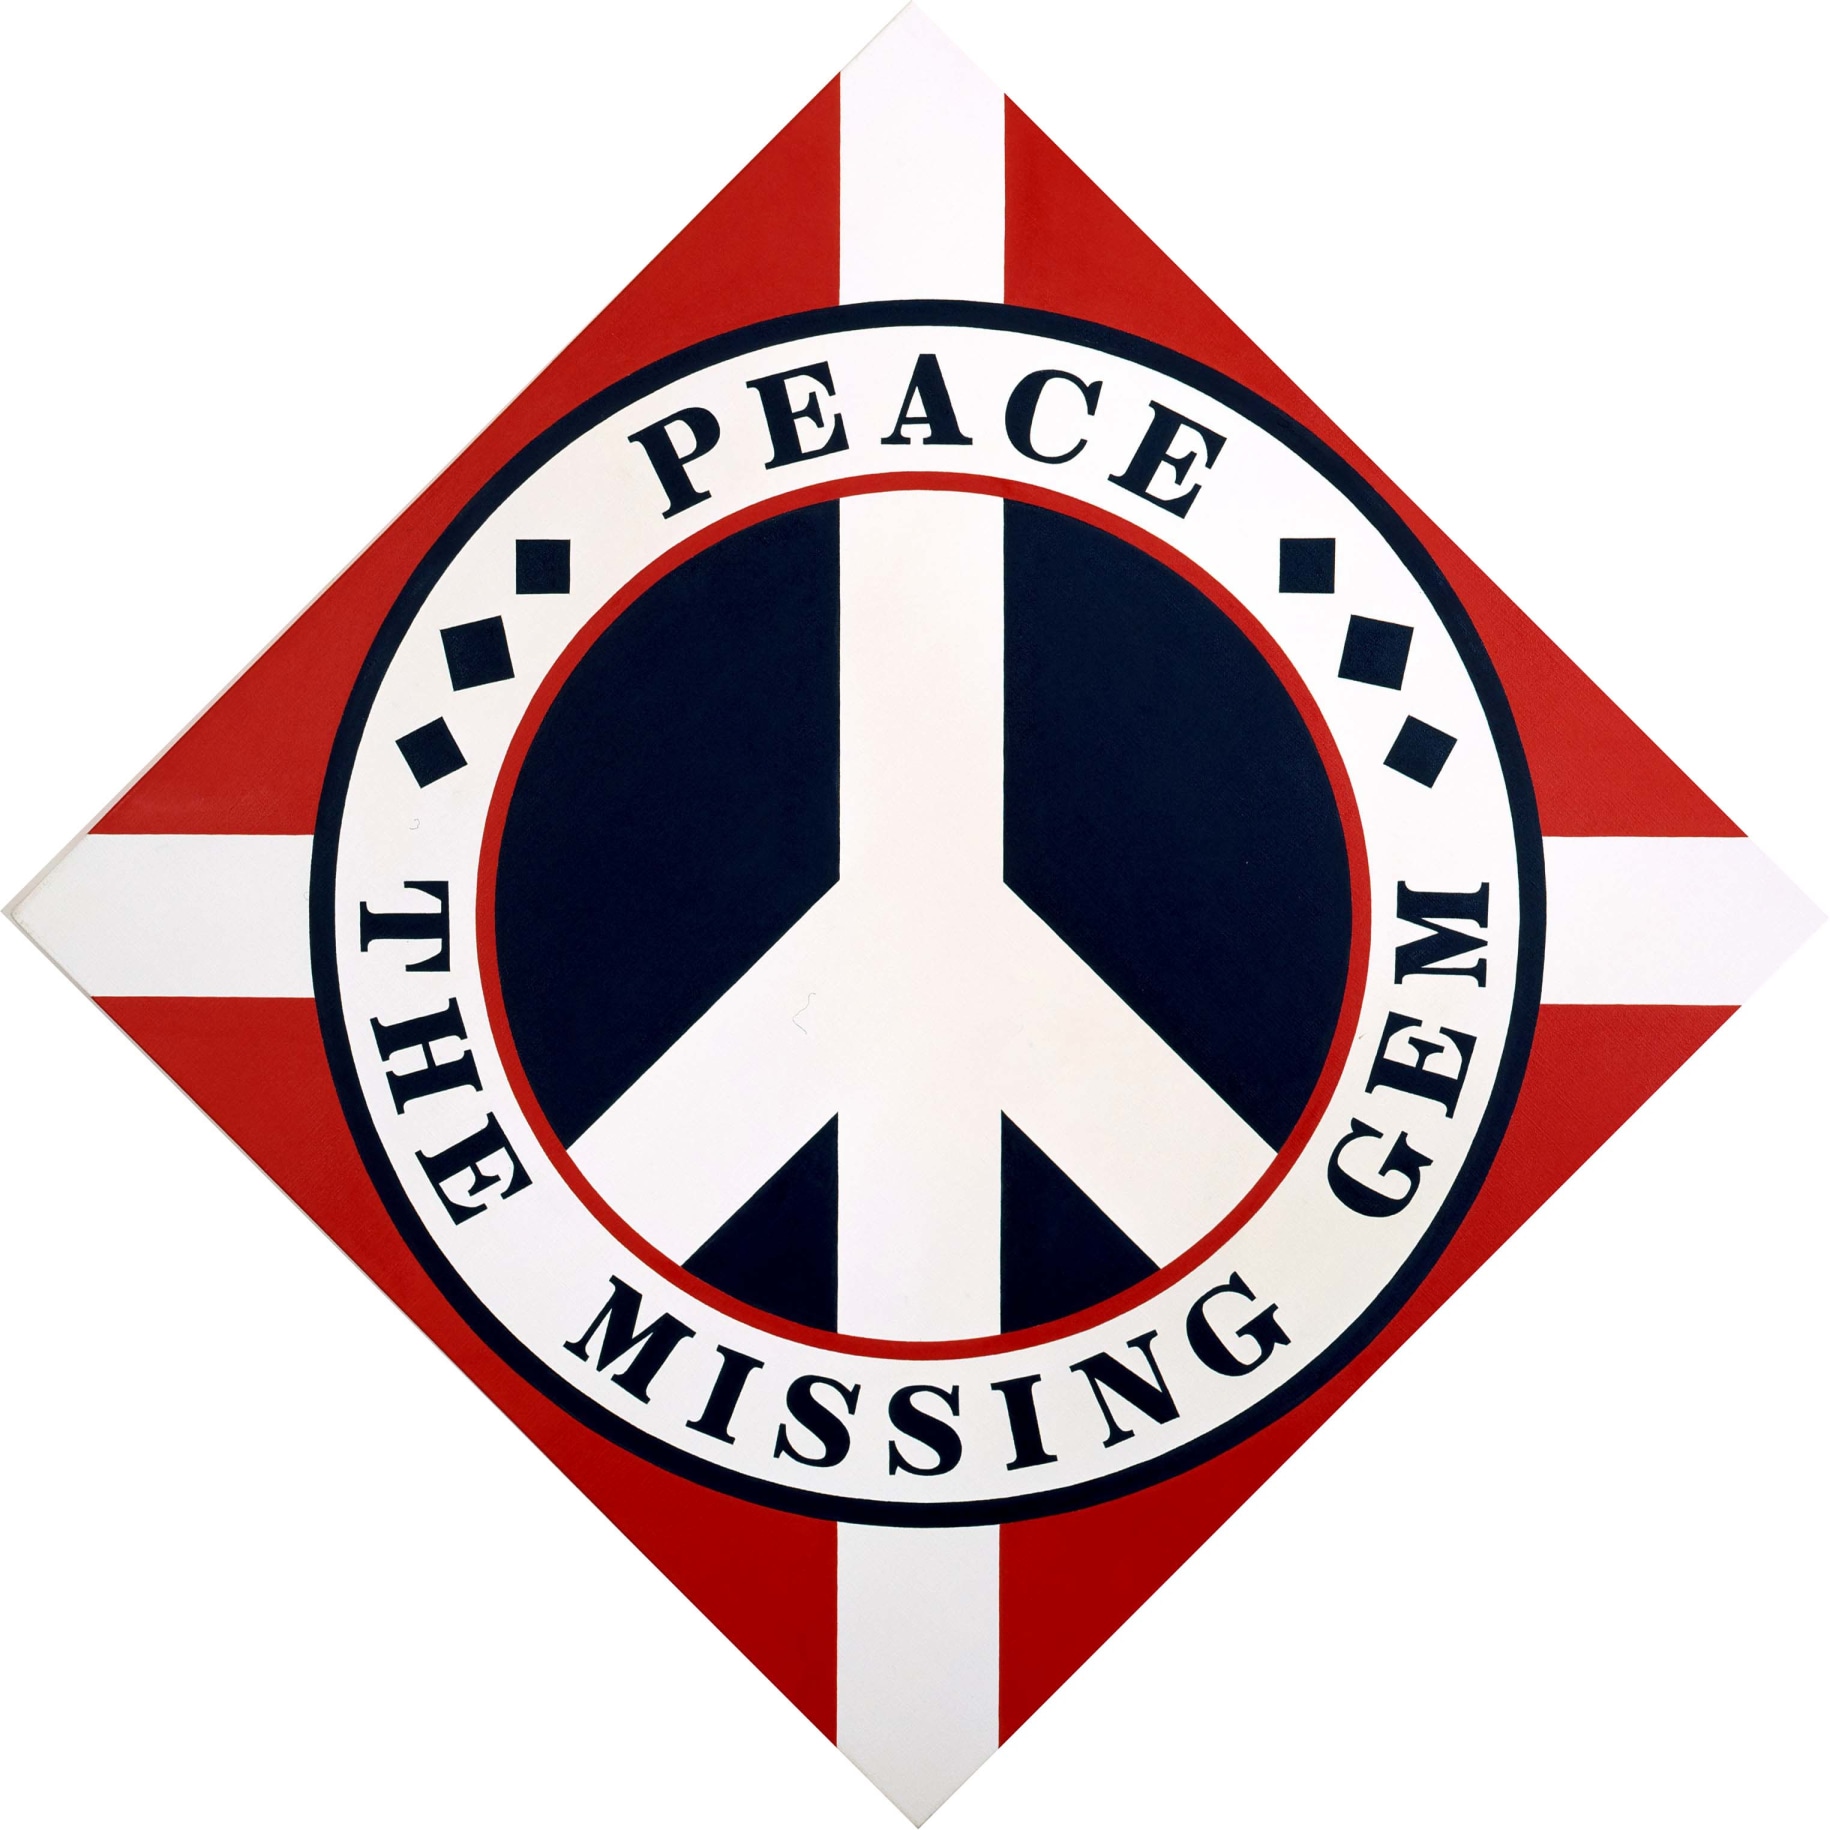 A 50 1/2 by 50 1/2 diamond shaped red painting with a white peace sign in a black circle. The ring around the circle is white with a red inner outline and a black outer outline. In it the work's title, &quot;Peace The Missing Gem,&quot; is painted in black letters. &quot;Peace&quot; appears on the top half, and &quot;The Missing Gem&quot; appears on the bottom half. Three small black diamonds have been painted on each side of the word &quot;Peace.&quot; White rectangular bands of paint go from the outer edge of the circle to each corner of the triangle.